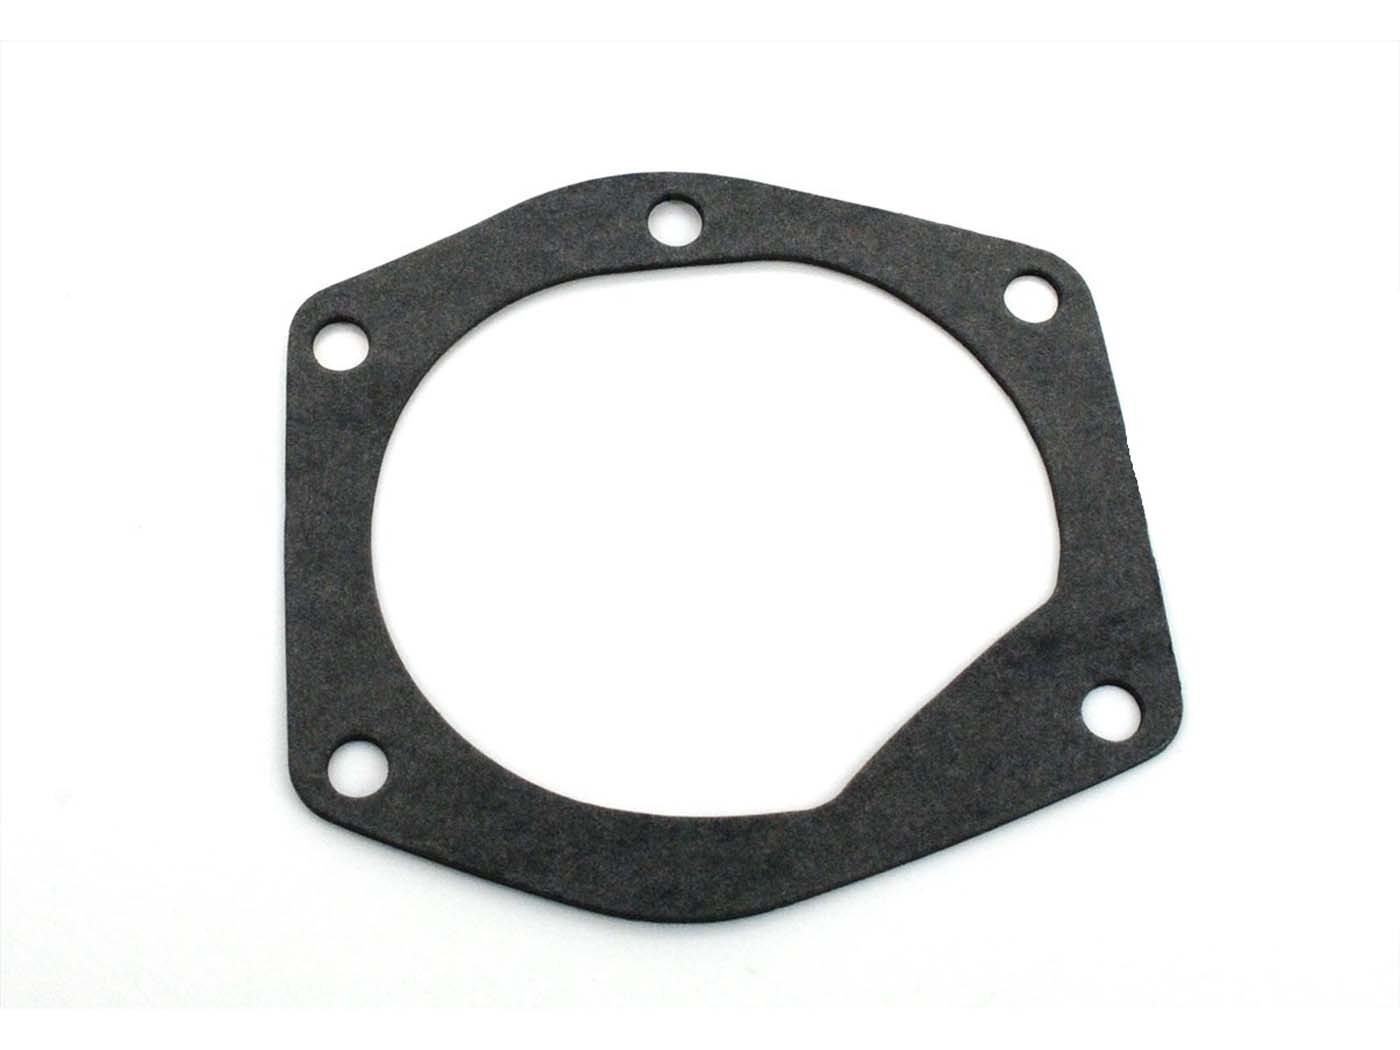 Engine Clutch Cover Gasket For Hercules Prima M Sachs 504 505